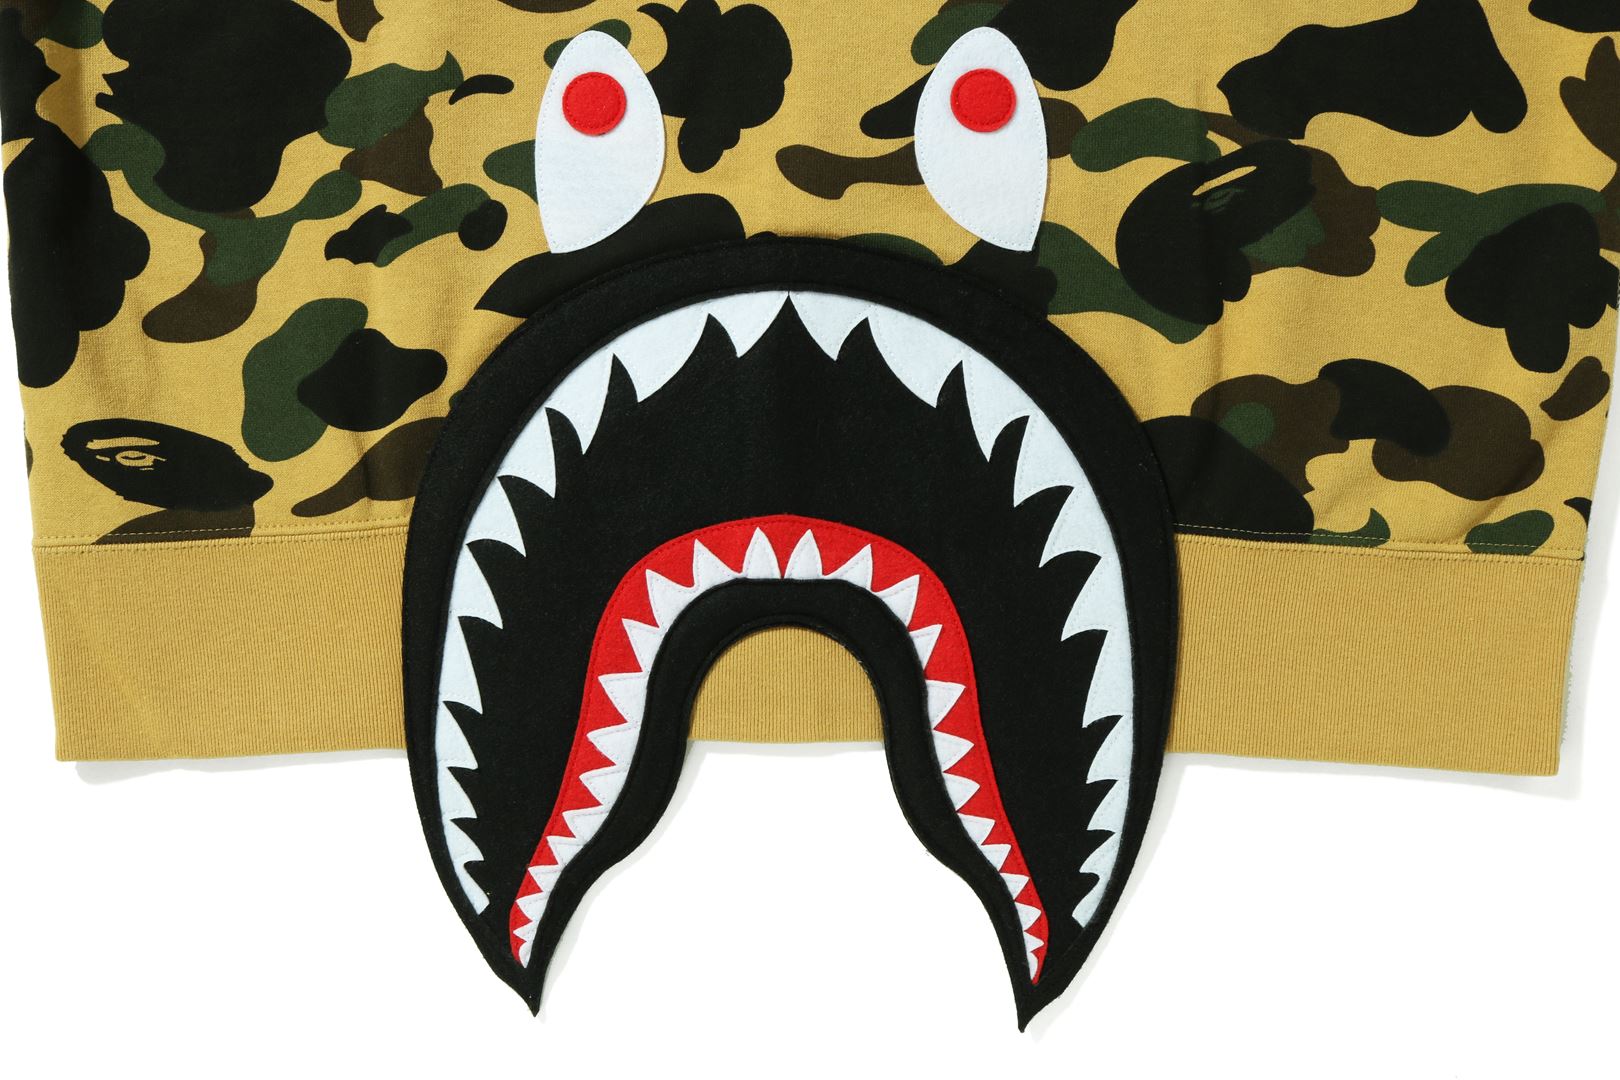 1ST CAMO SHARK RELAXED FIT PULLOVER HOODIE – uk.bape.com